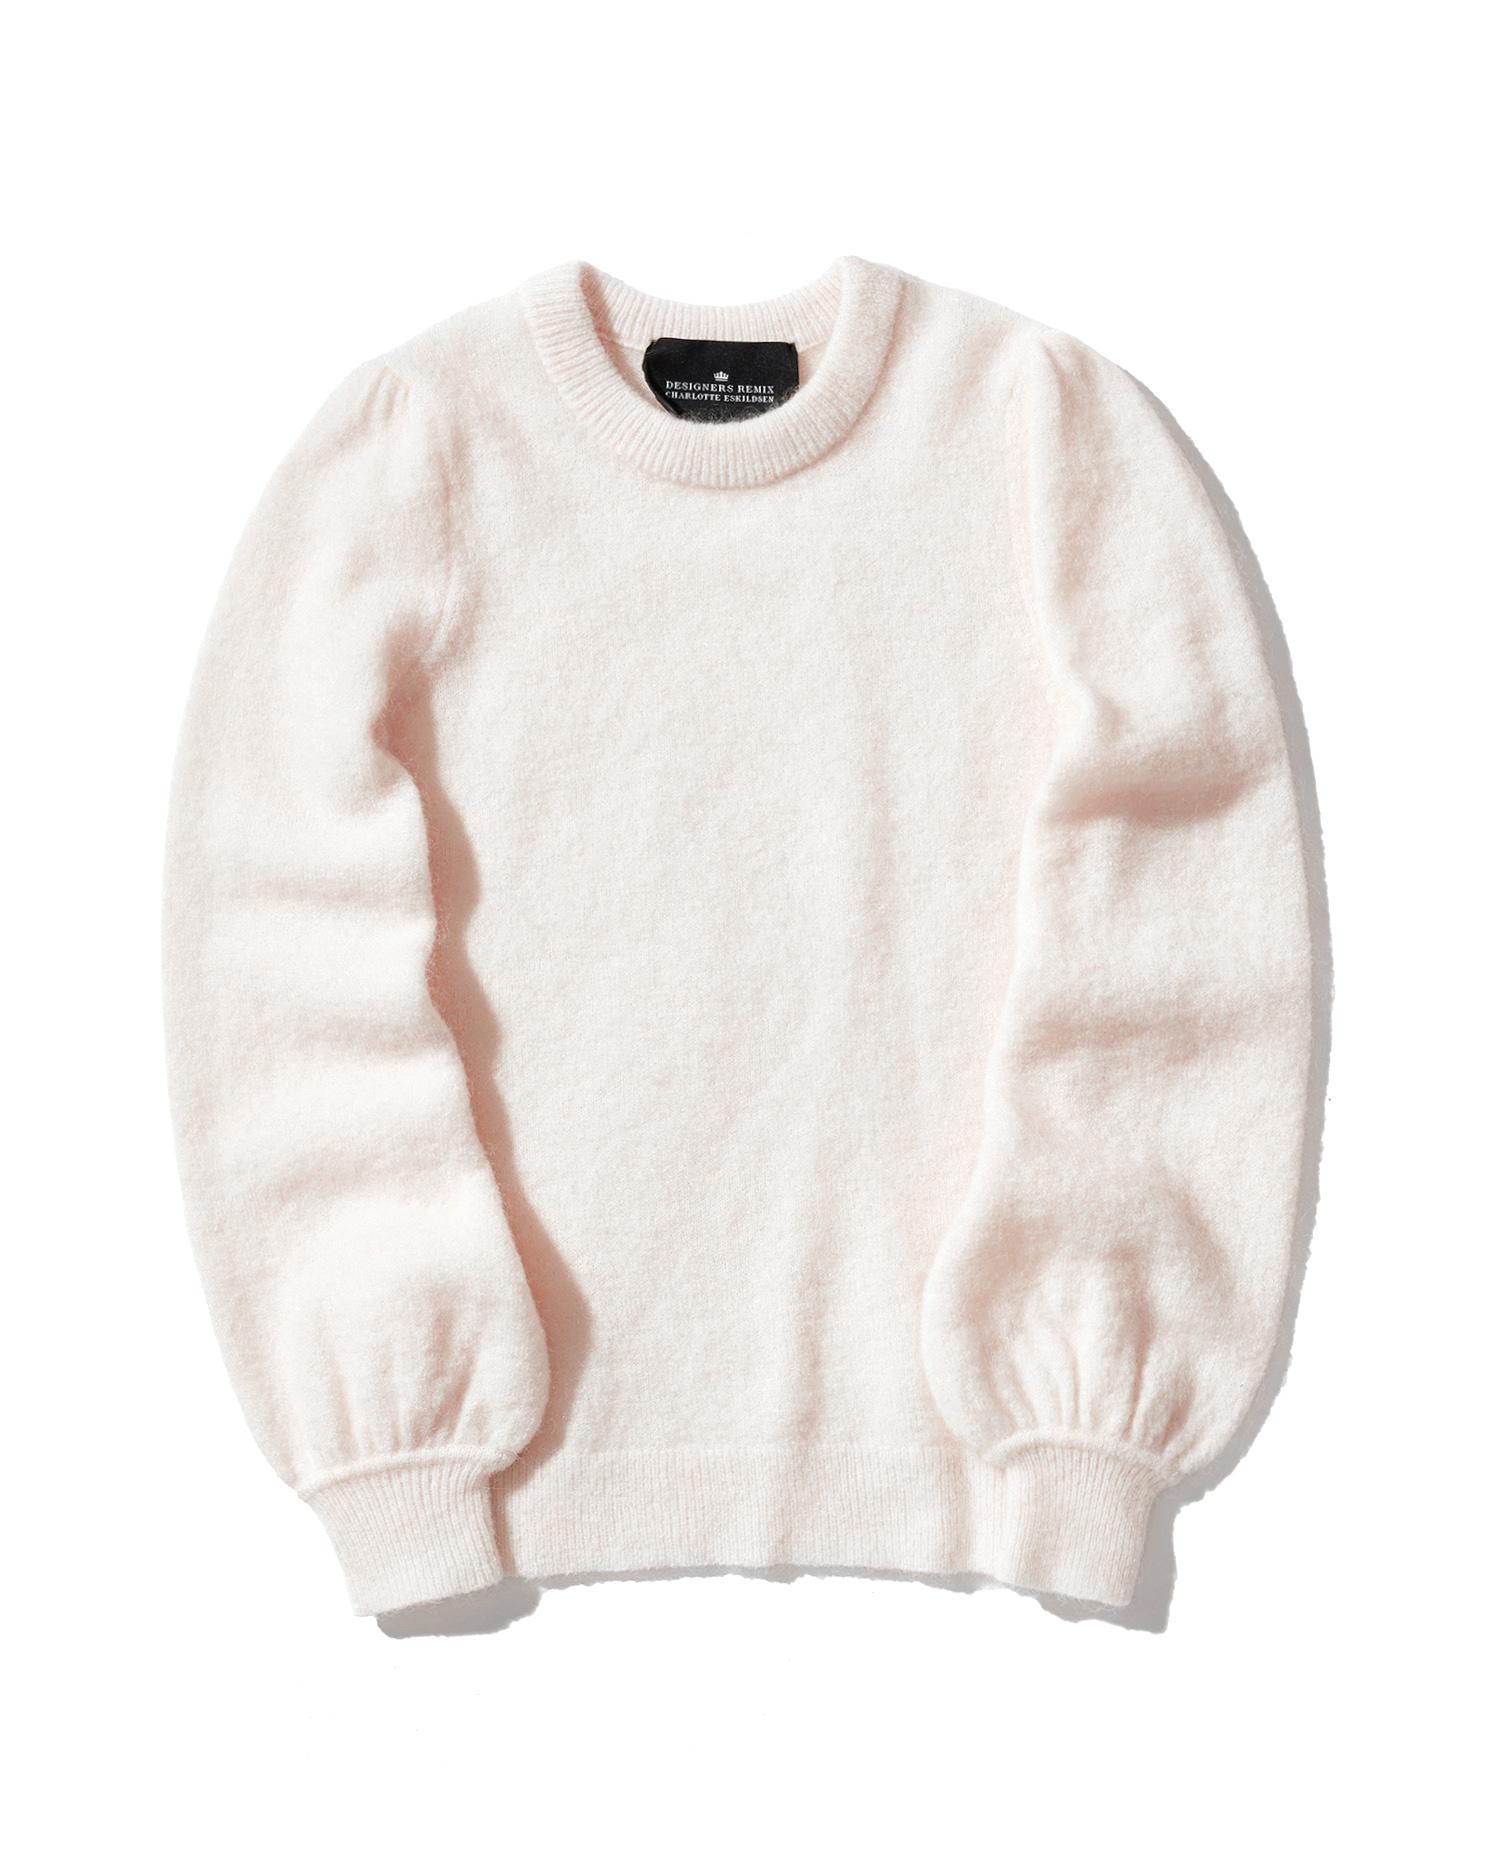 Tyler sleeve sweater by DESIGNERS REMIX